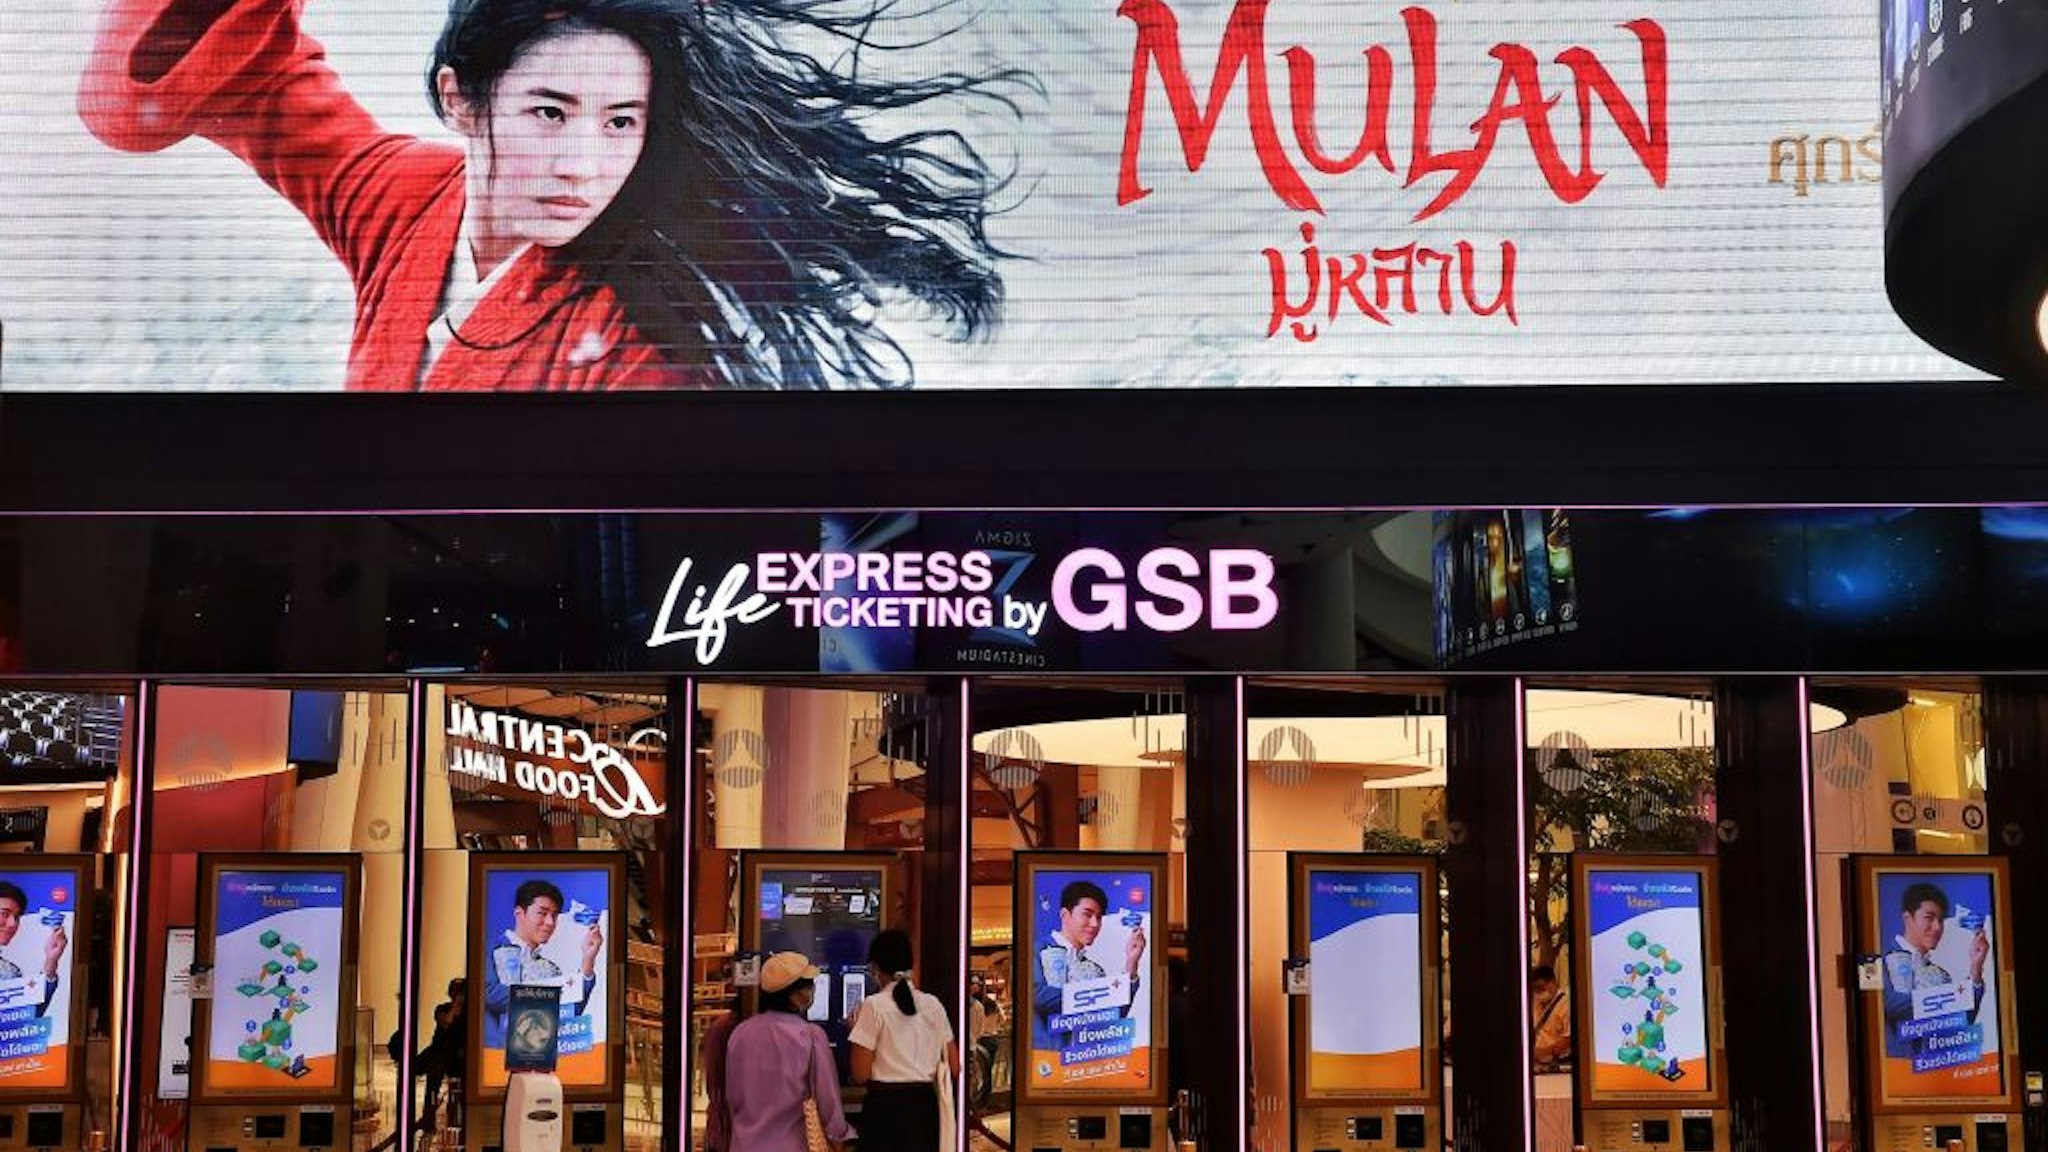 People buy tickets for Disneys Mulan film at a cinema inside a shopping mall in Bangkok on September 8, 2020. - Disney's "Mulan" remake is facing fresh boycott calls after it emerged some of the blockbuster was filmed in China's Xinjiang, where widespread rights abuses against the region's Muslim population have been widely documented.